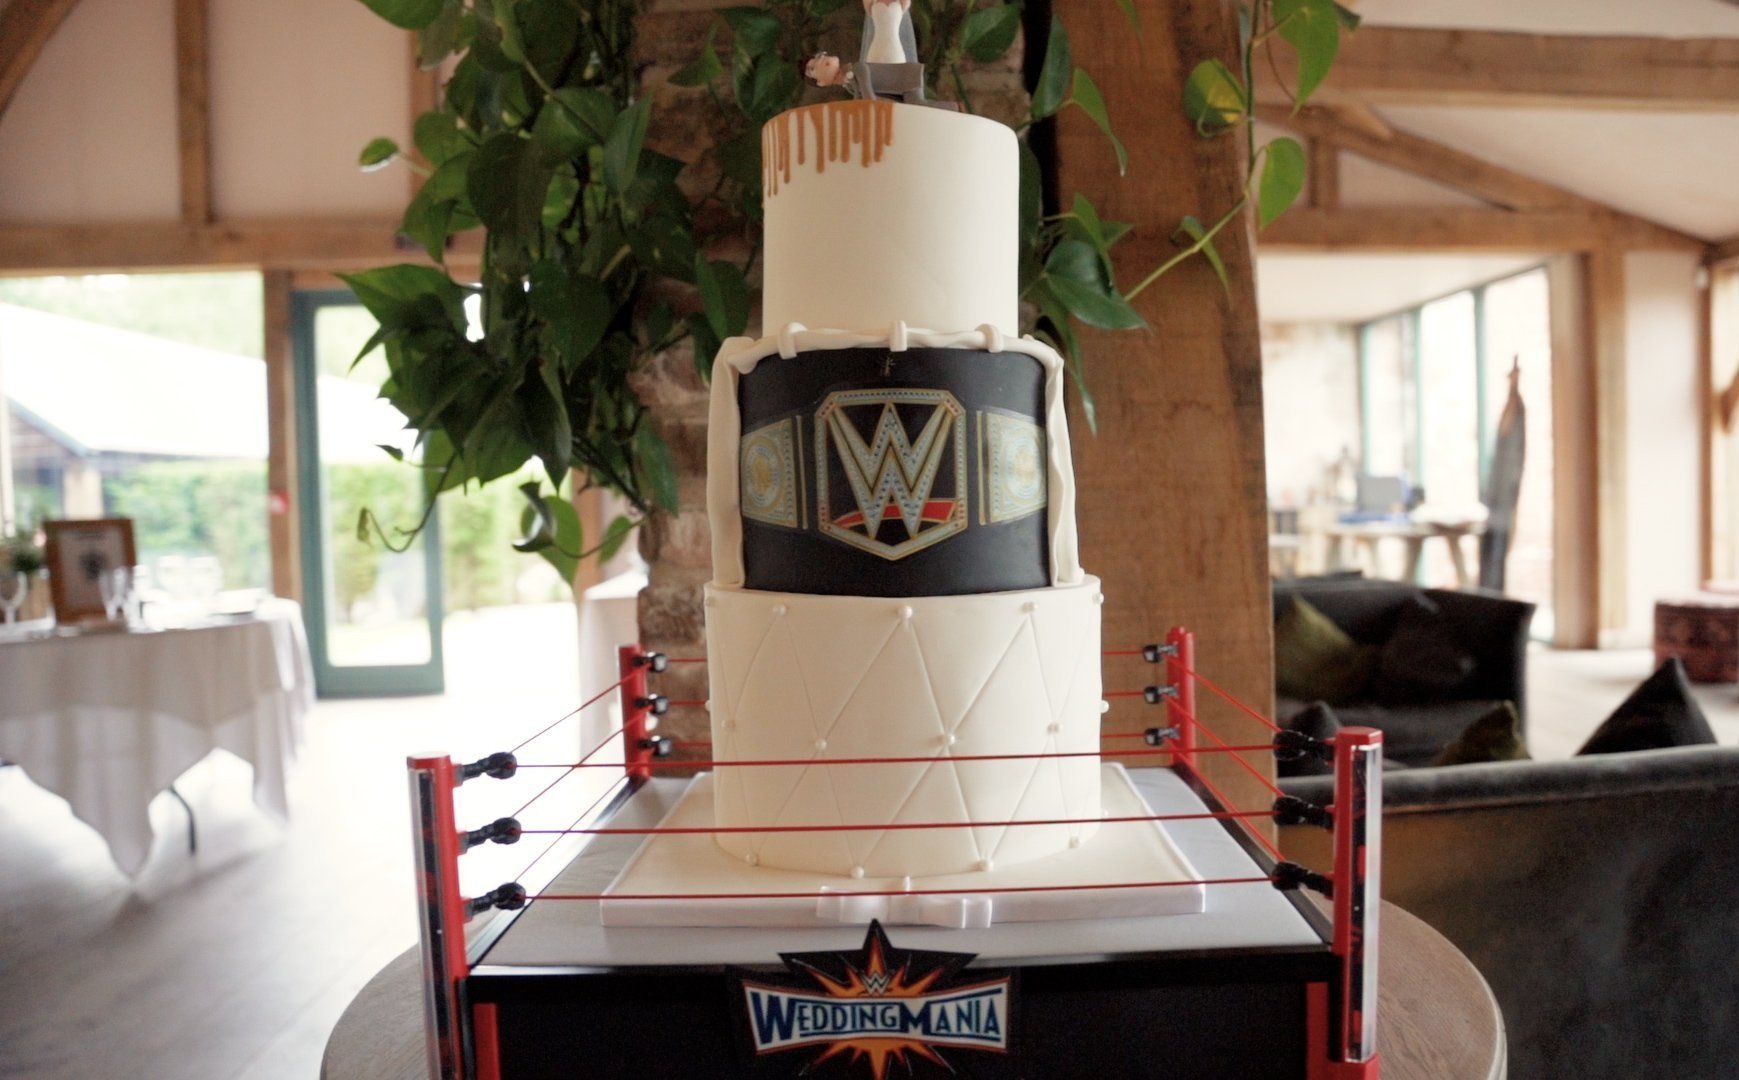 WWE wedding cake inside a mini wrestling ring. The cake is a three-tiered wedding cake with white and black icing and a WWE logo